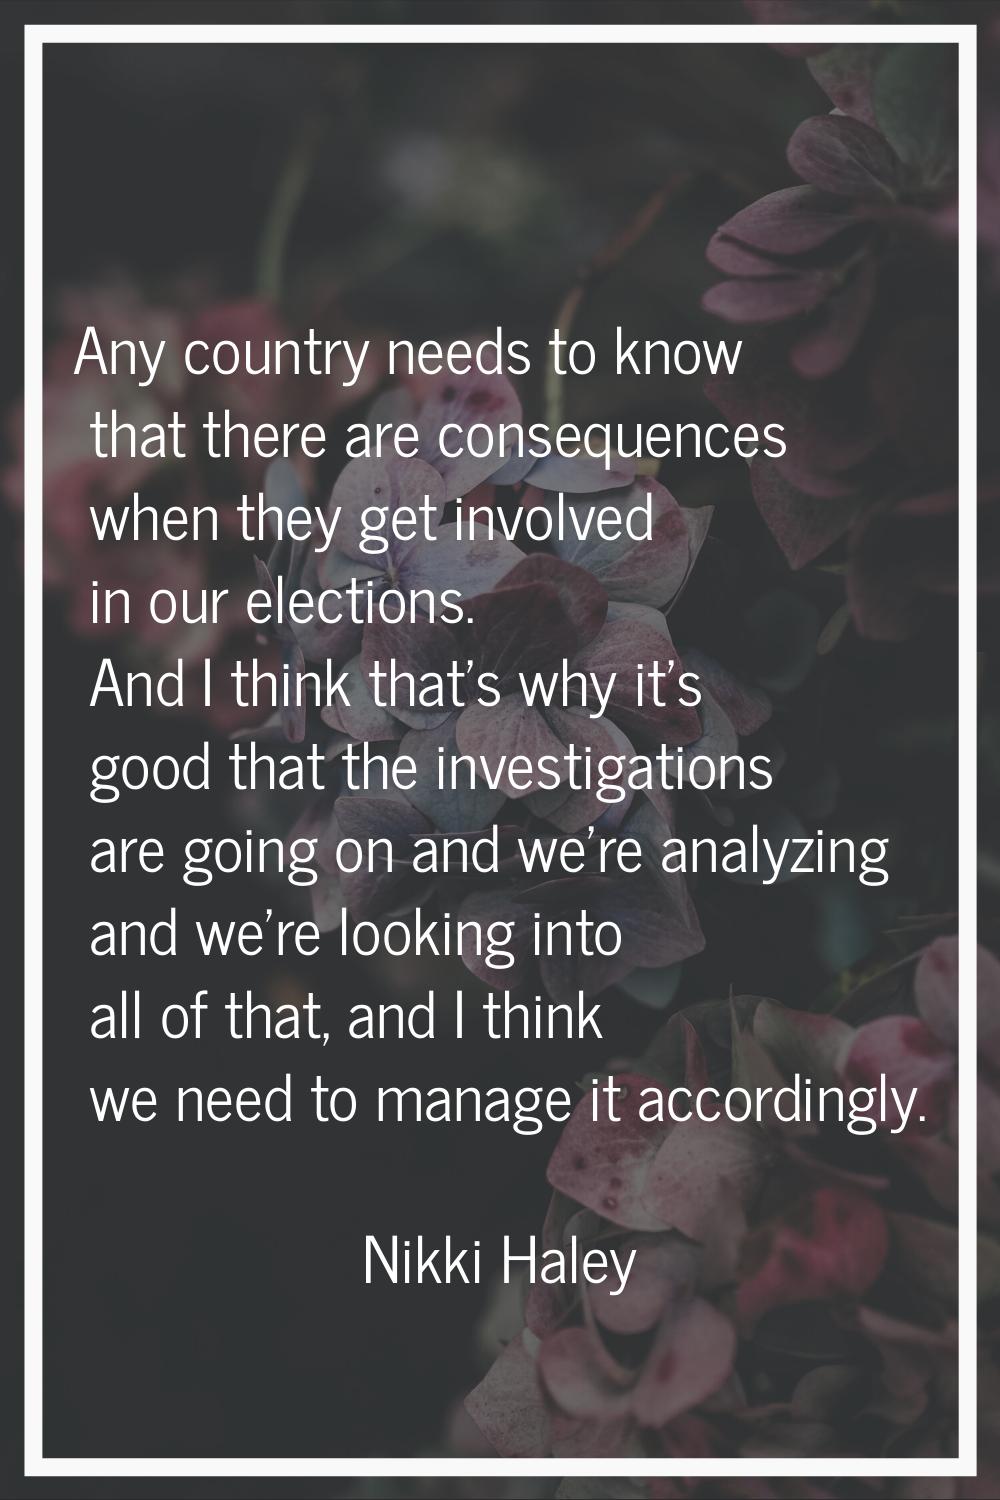 Any country needs to know that there are consequences when they get involved in our elections. And 